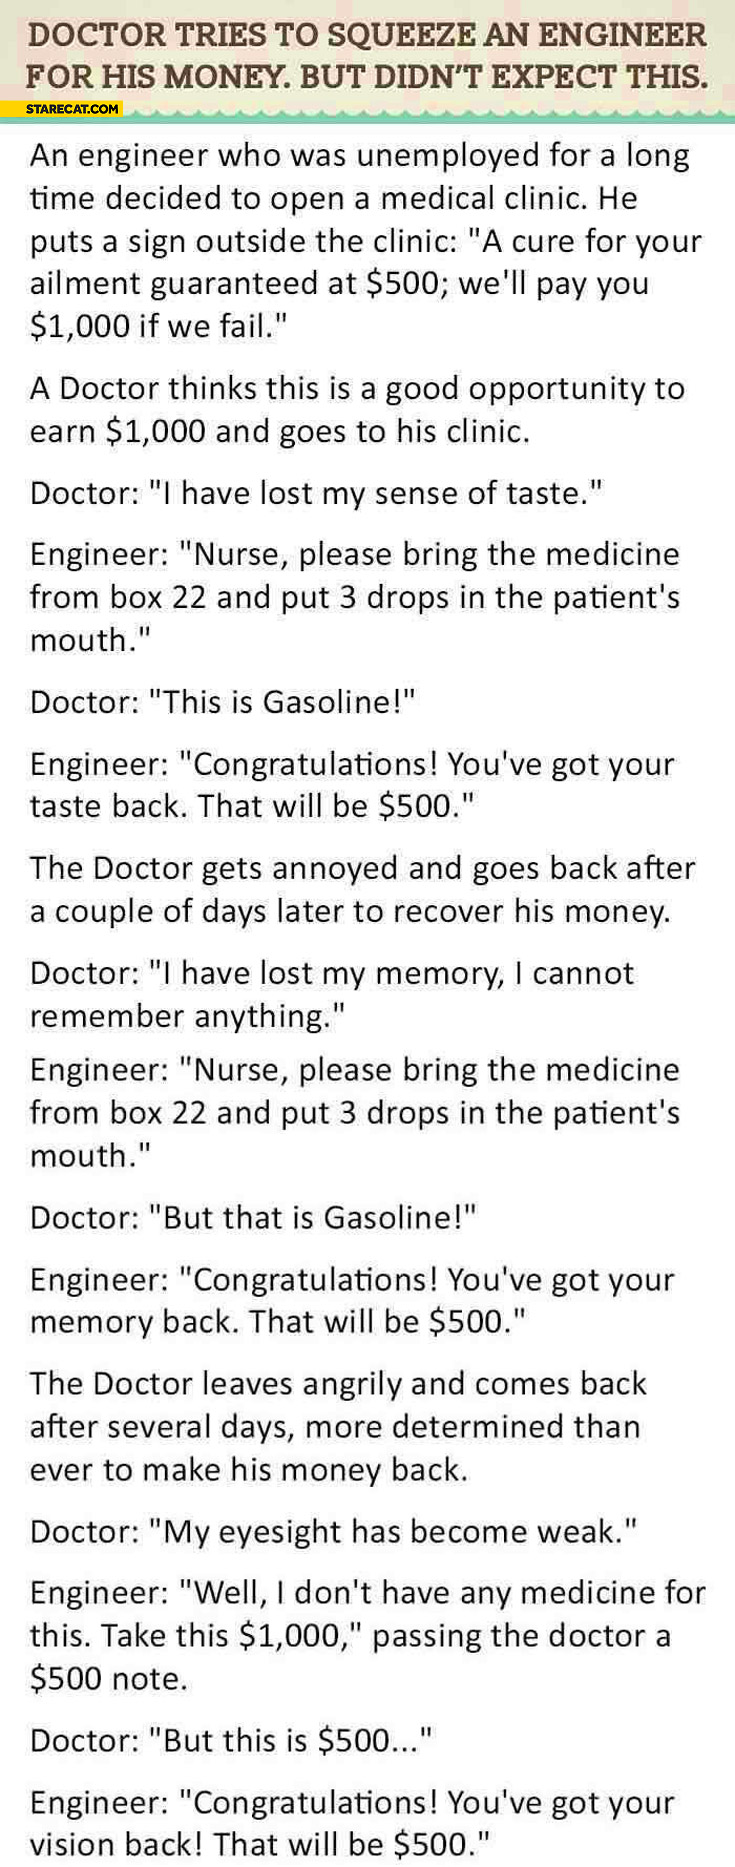 Doctor tries to squeeze an engineer for his money didn’t expect this